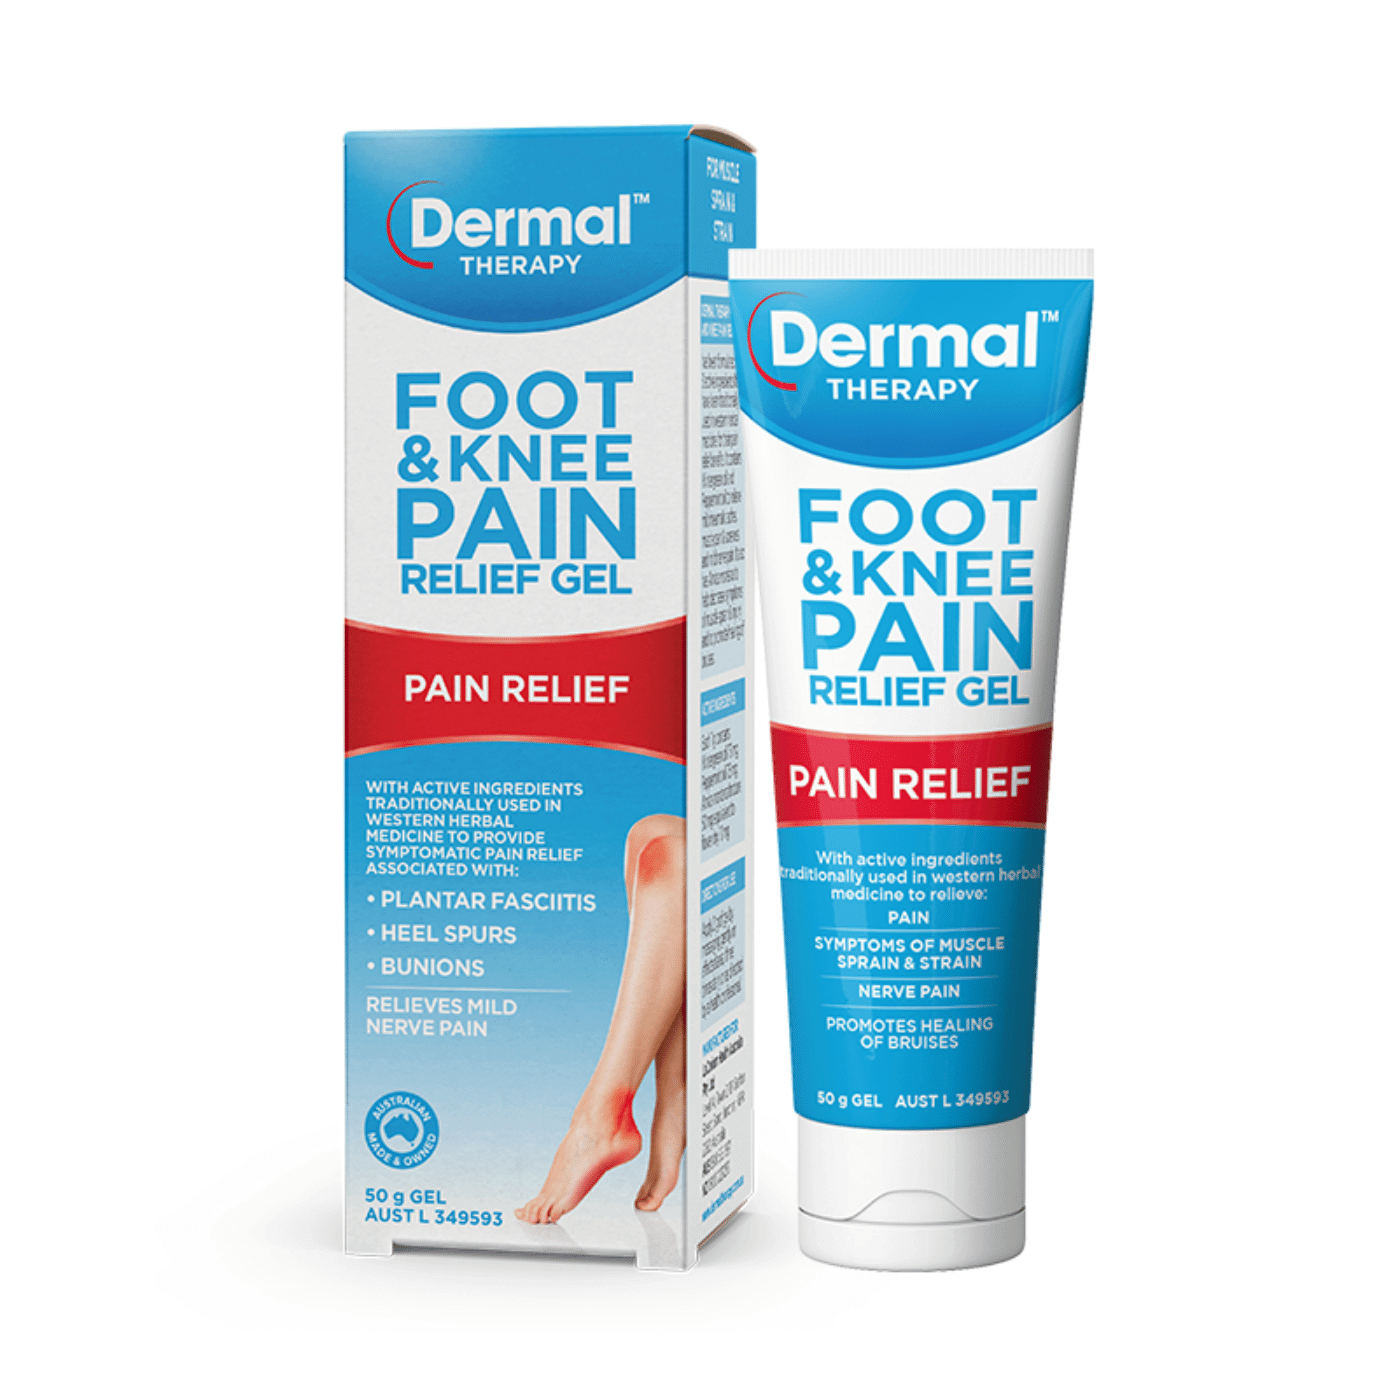 Dermal Therapy Foot and Knee Pain Relief Gel